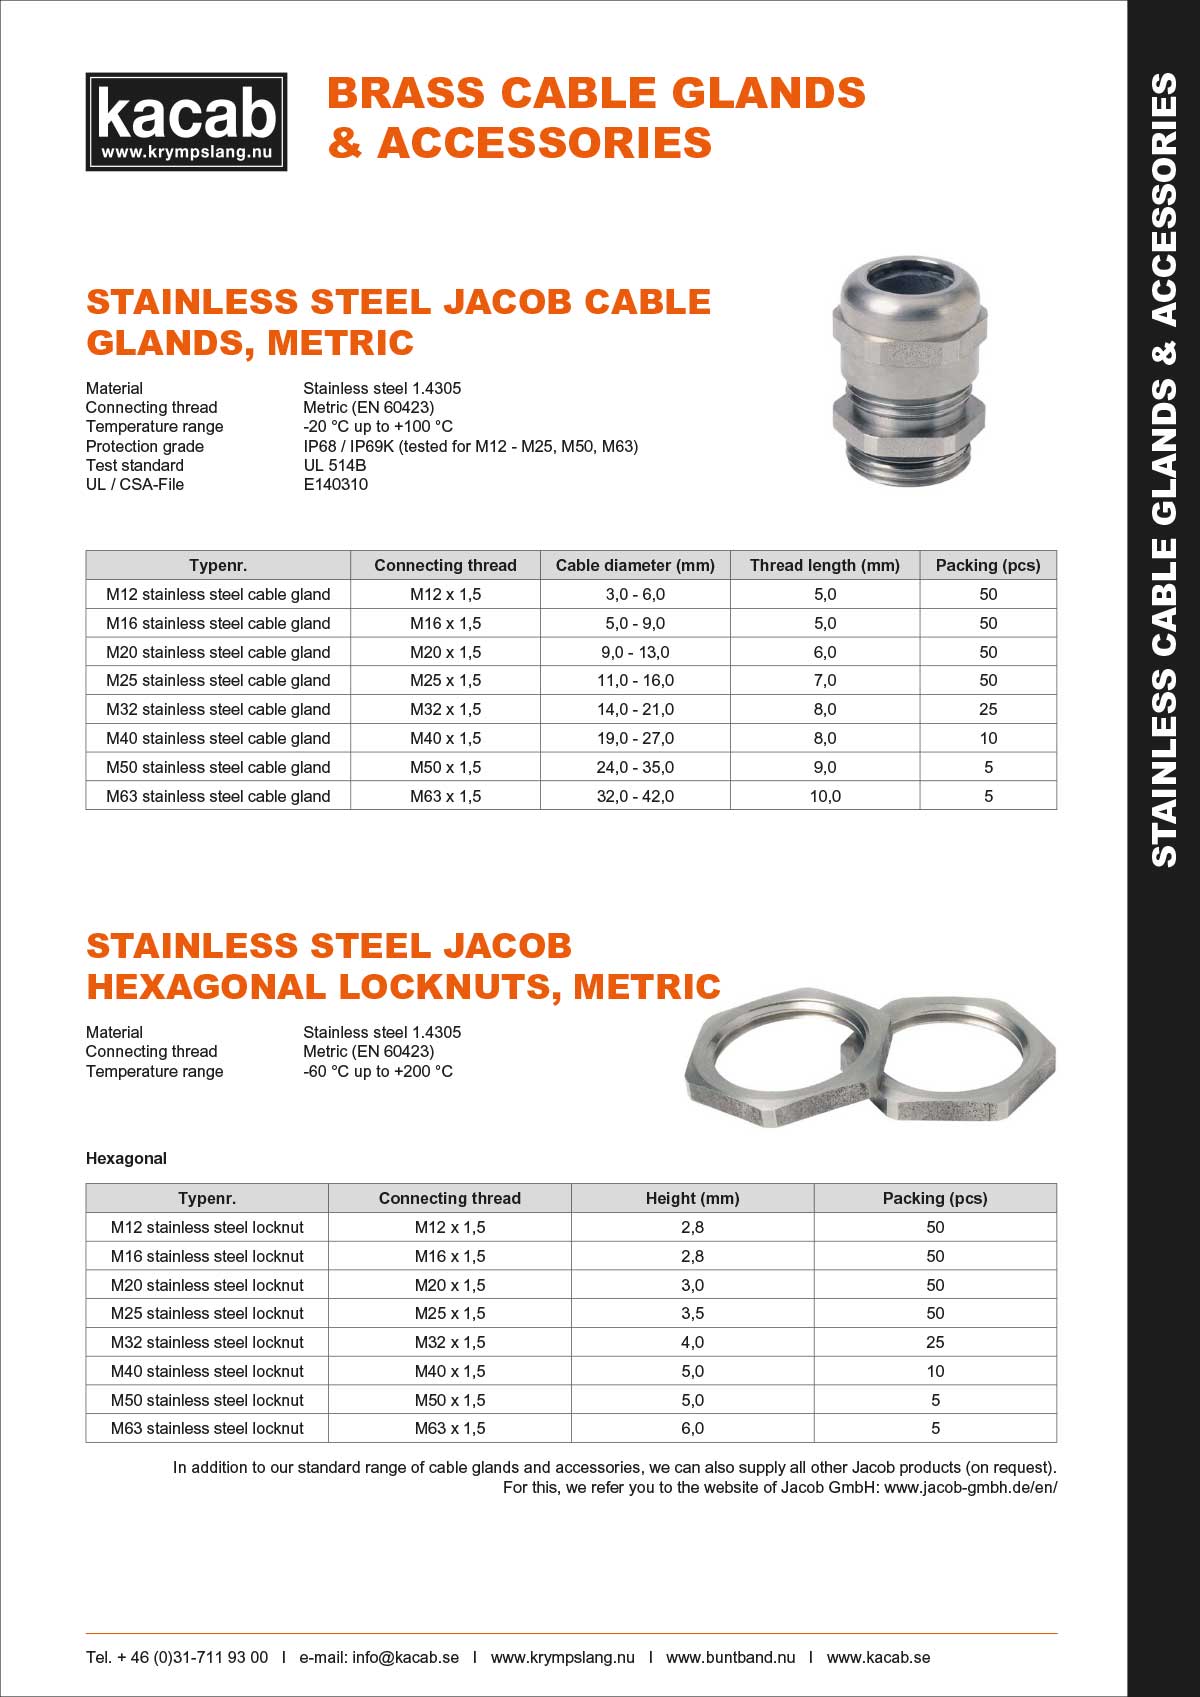 Stainless steel Jacob cable glands-Metric